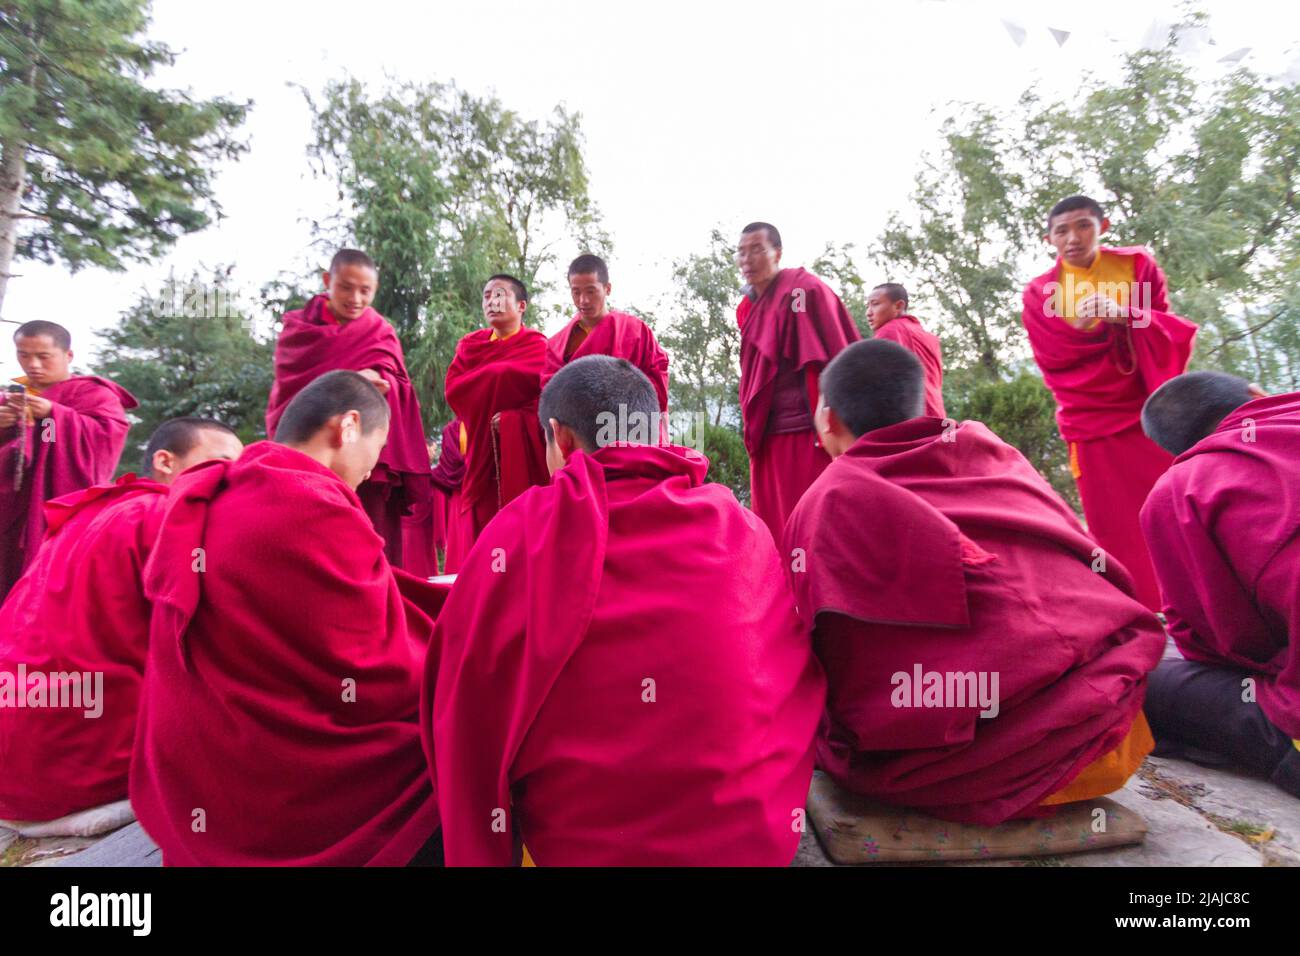 Bhutanese Buddhist monks engage in philosophical debates in the courtyard of a monastery in Bumthang, Bhutan Stock Photo